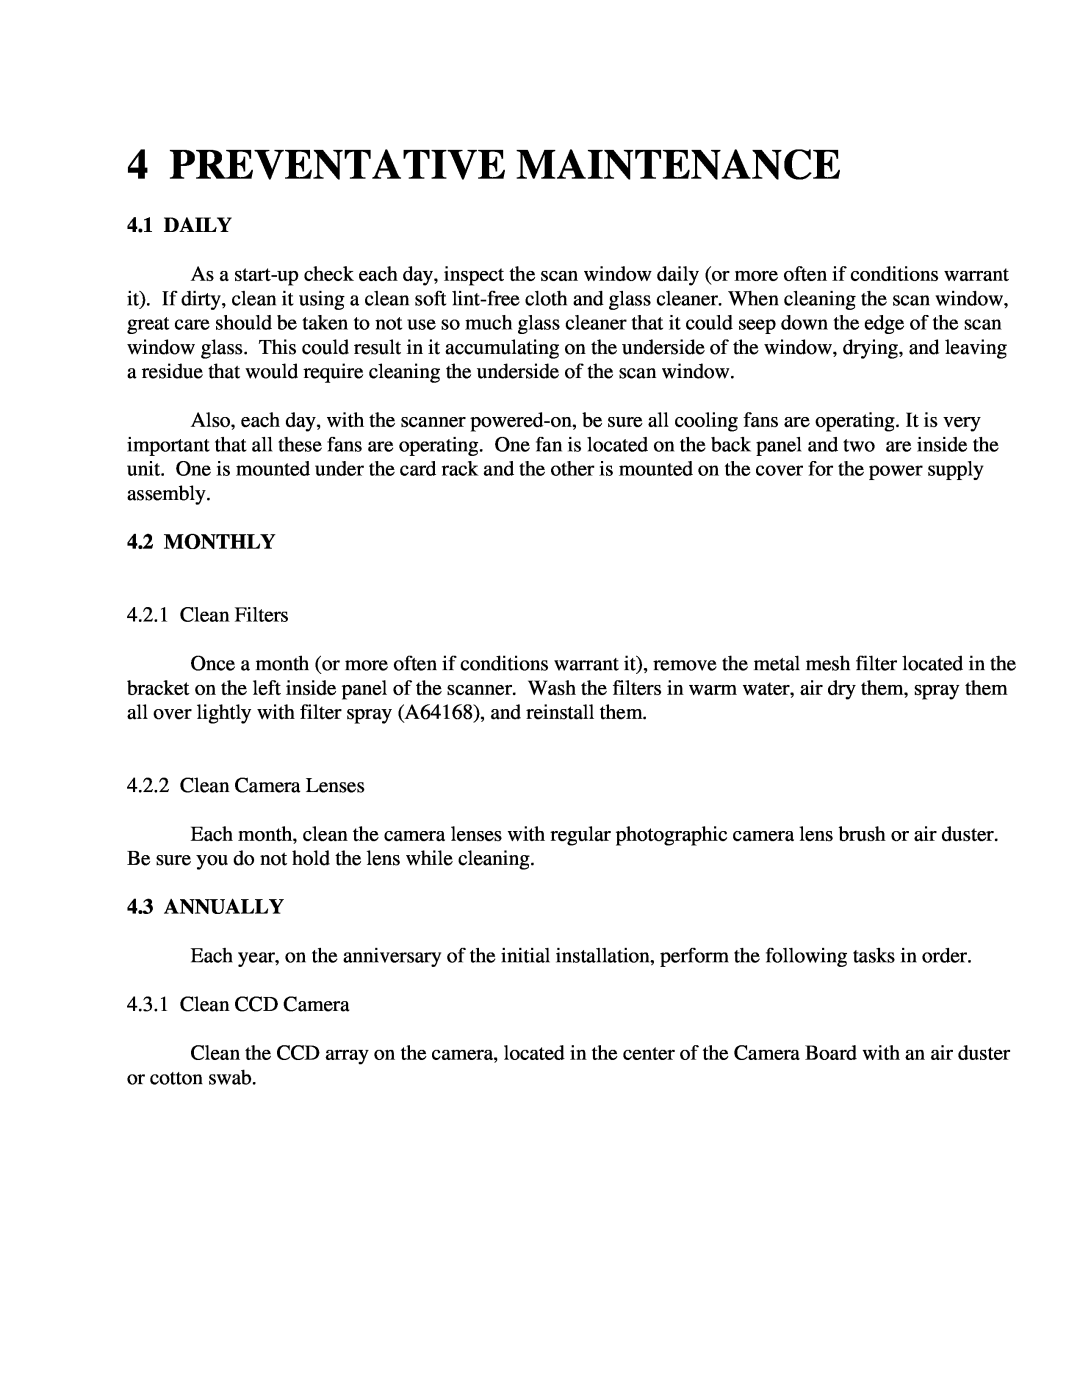 IBM CF Series manual Preventative Maintenance, Daily, Monthly, Annually 